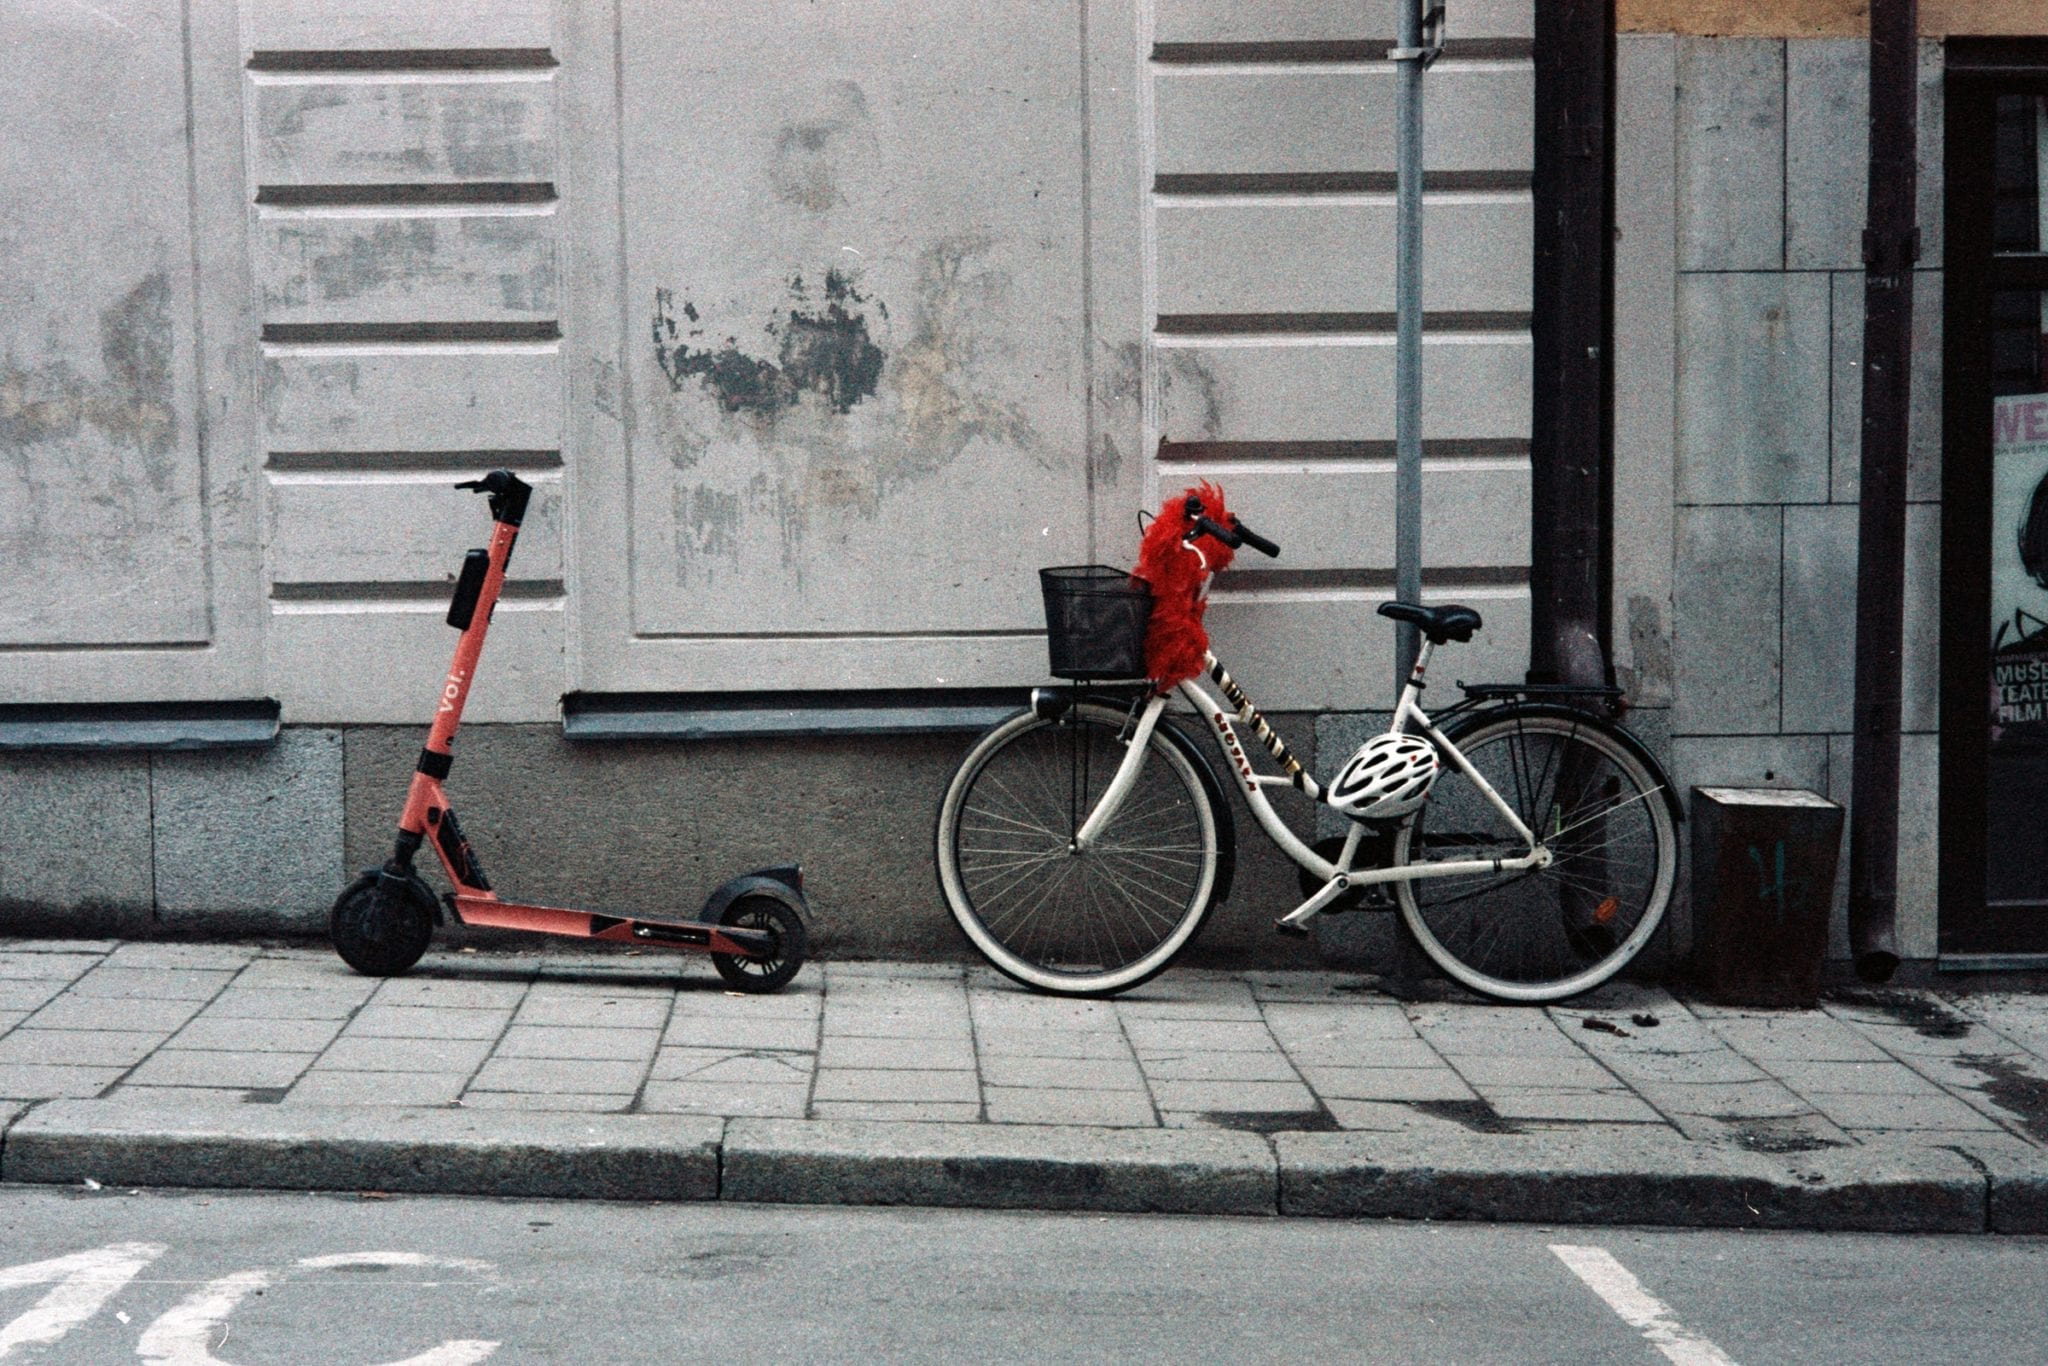 A parked scooter and bicycle. Photo by Gemma Evans on Unsplash